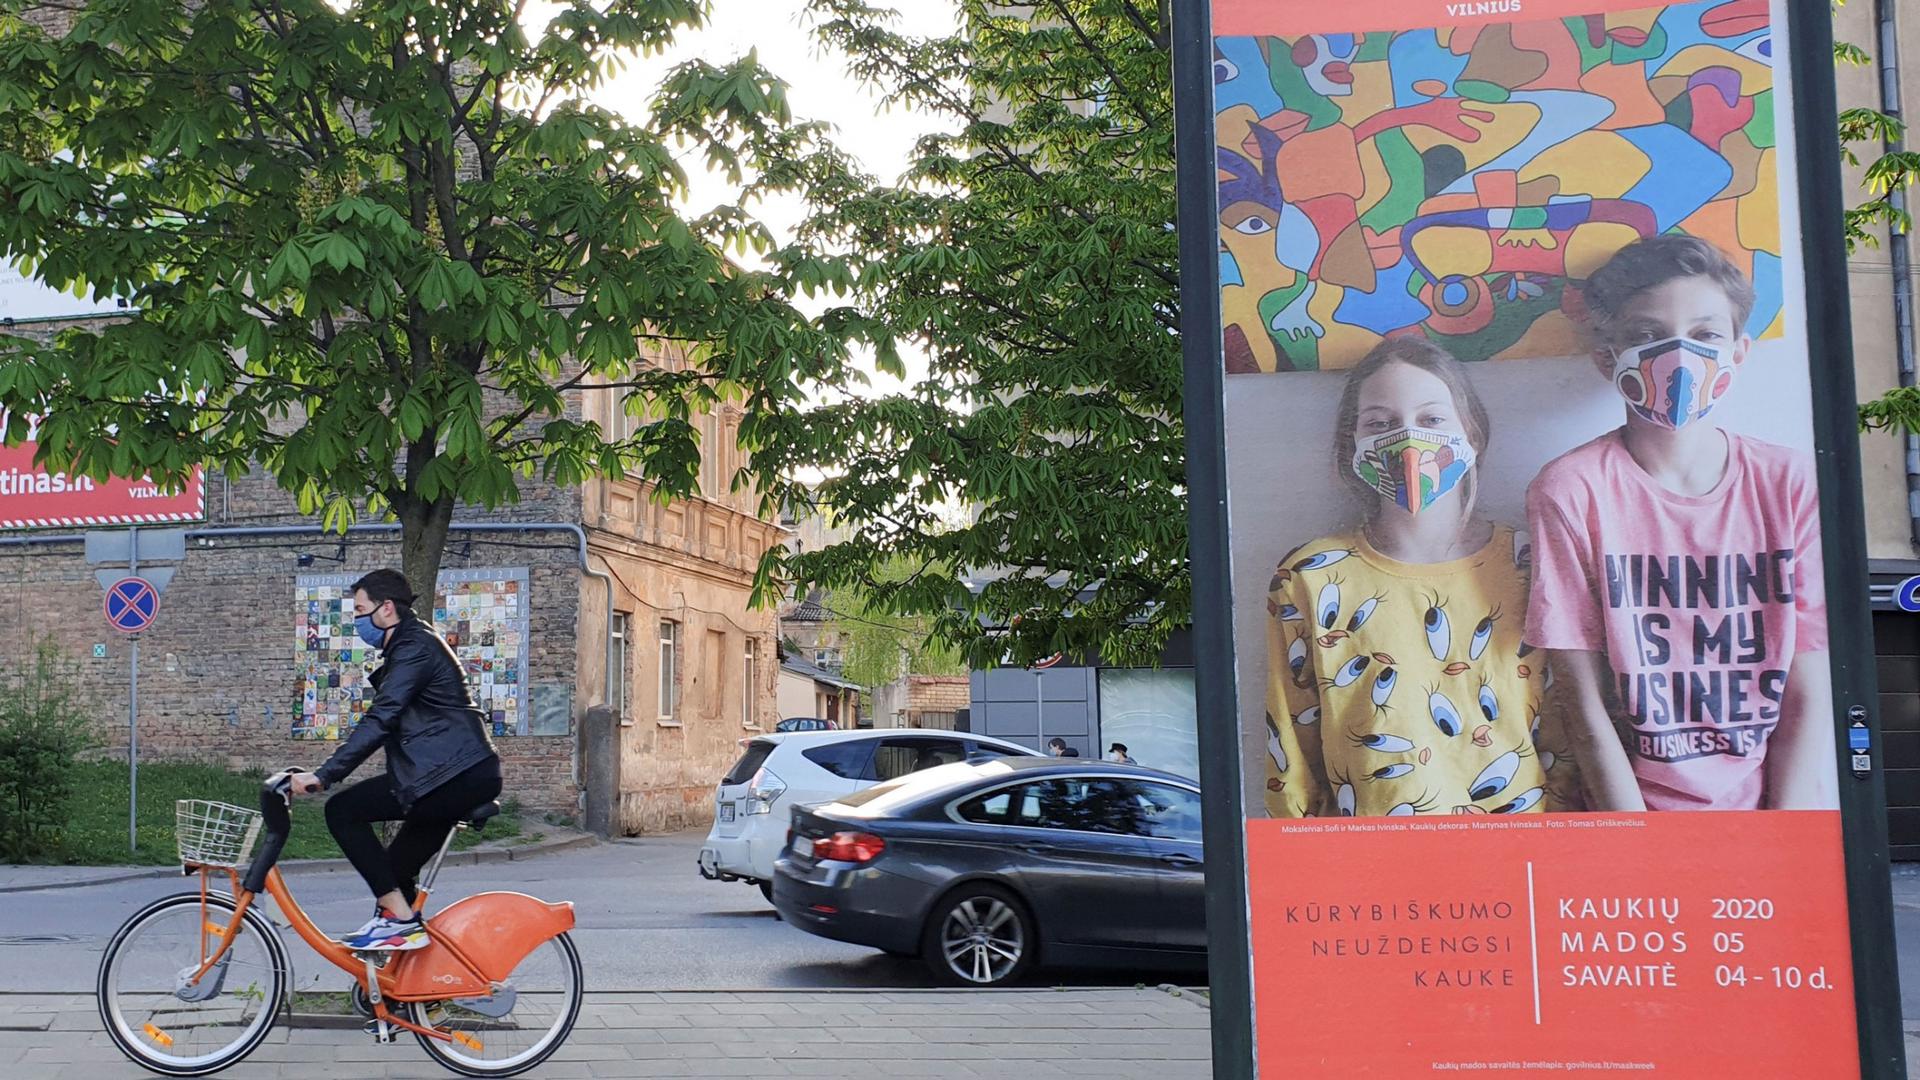 A person on an orange bicycle rides past a billboard of people with masks